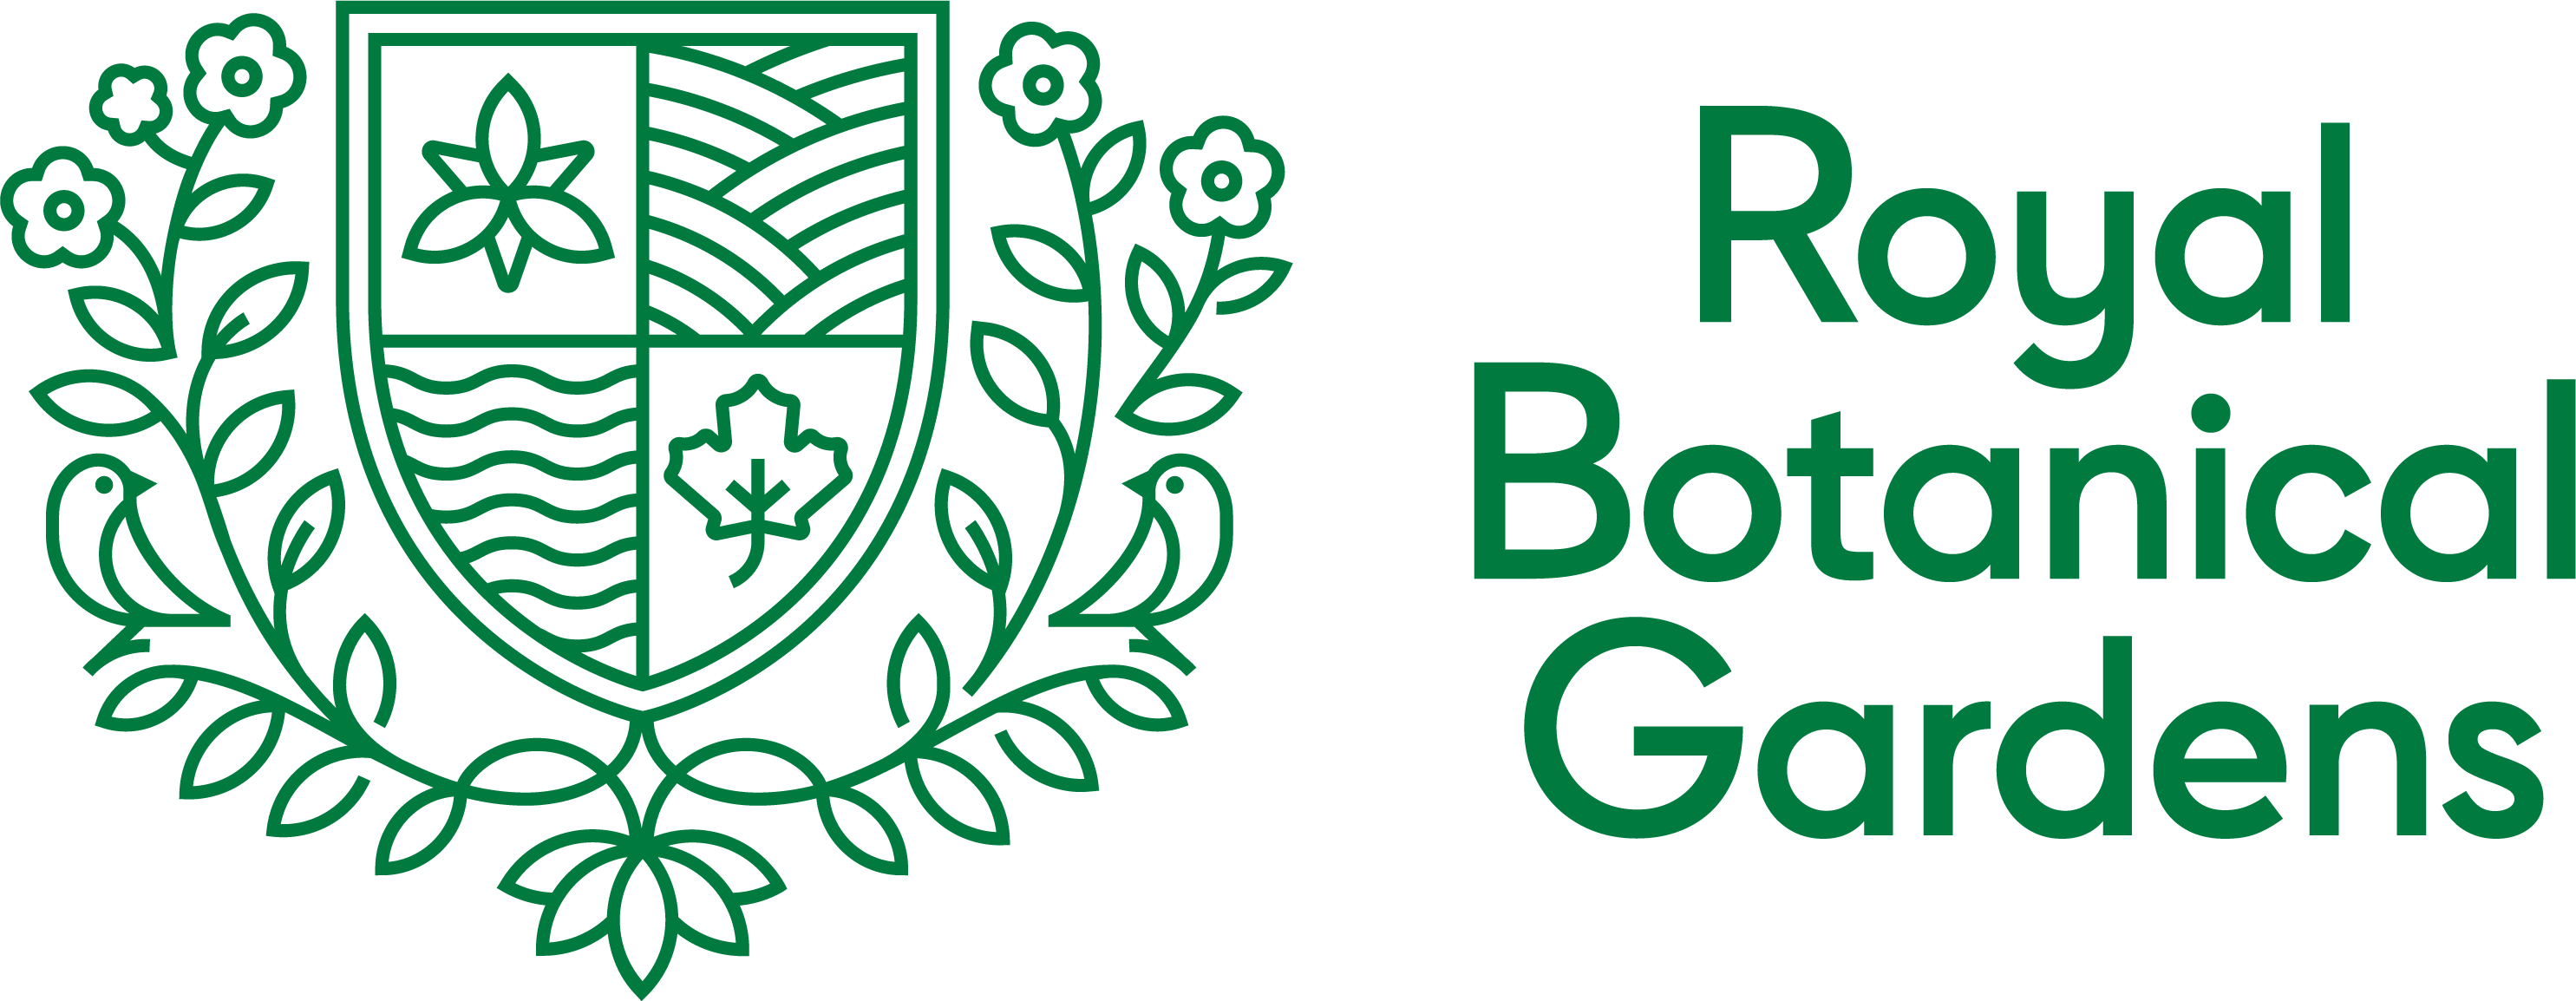 Royal Botanical Gardens Logo, featuring a green lined crest